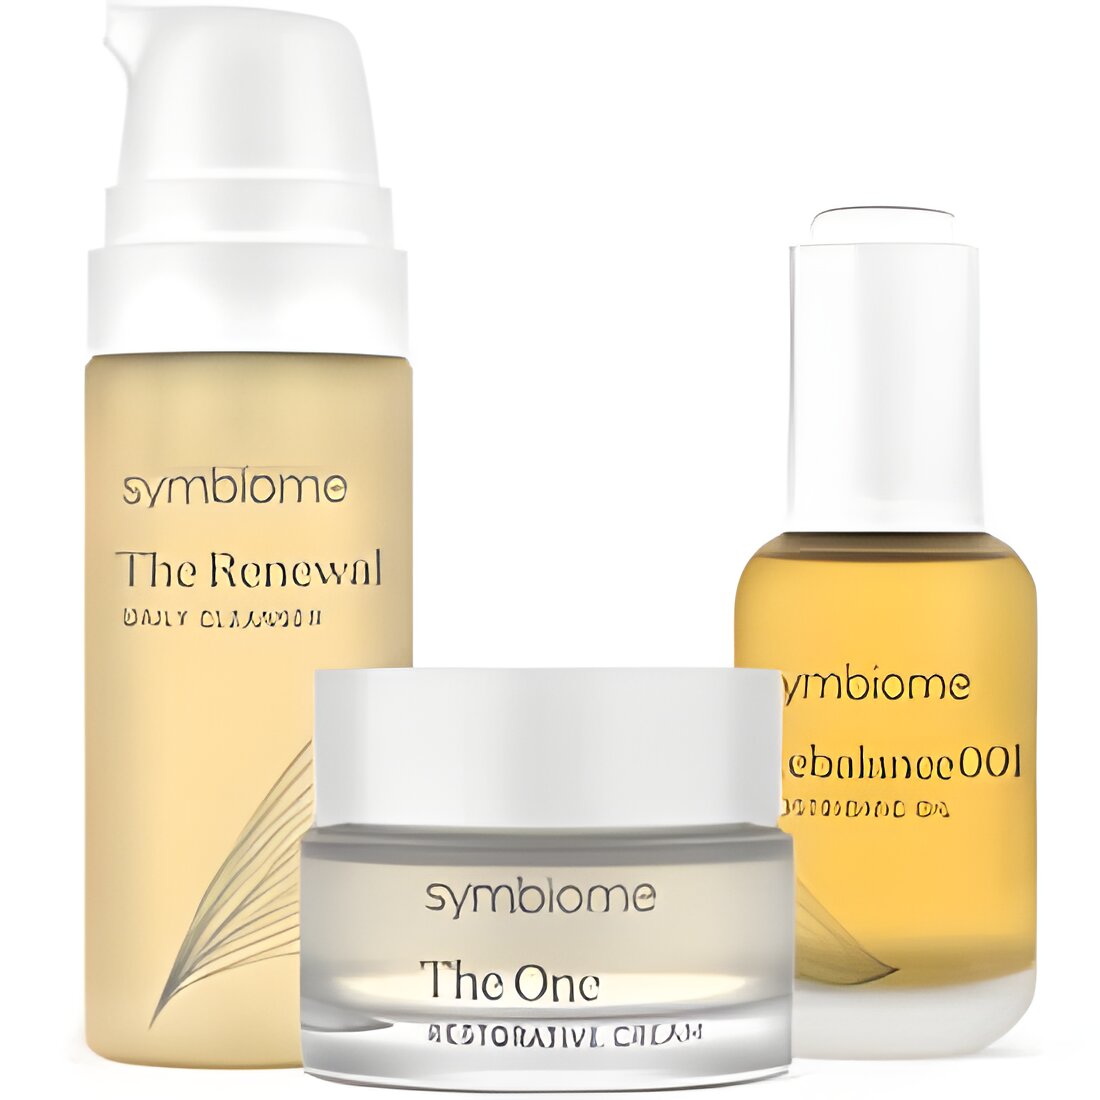 Free Symbiome Skincare Products